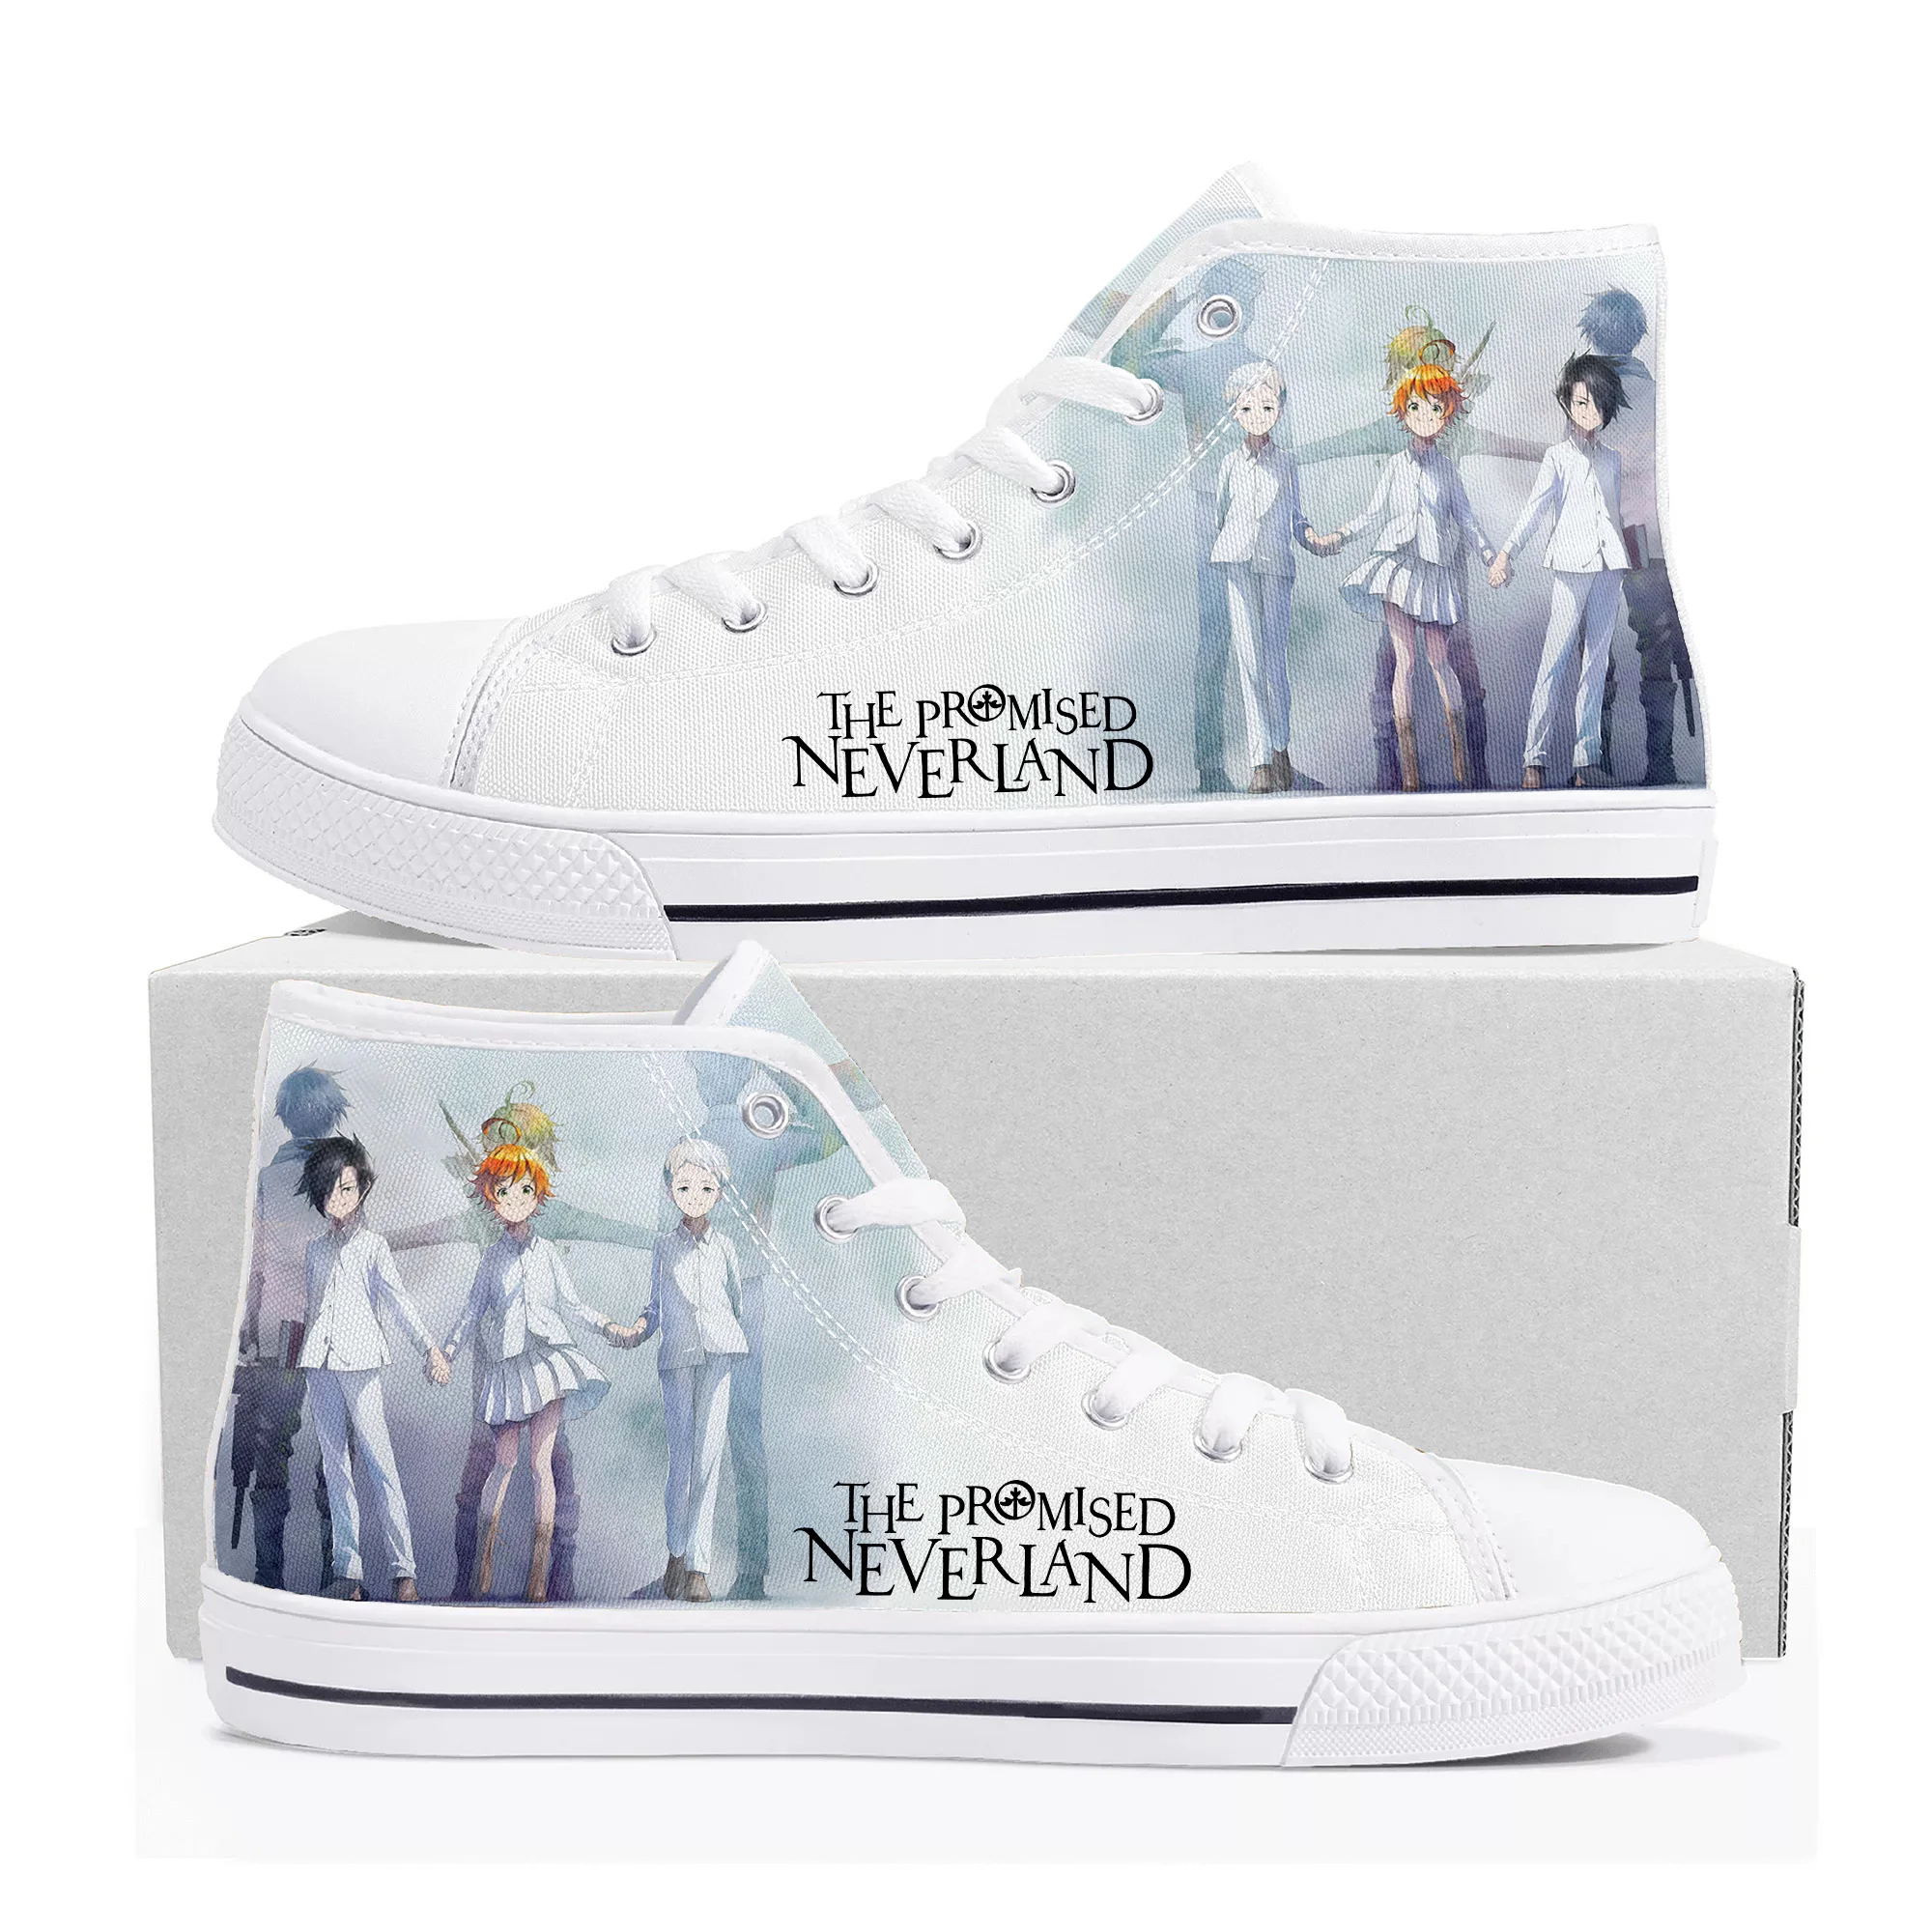 

The Promised Neverland Emma High Top Sneakers Men Women Teenager High Quality Canvas Sneaker Comics Manga Couple Customized Shoe